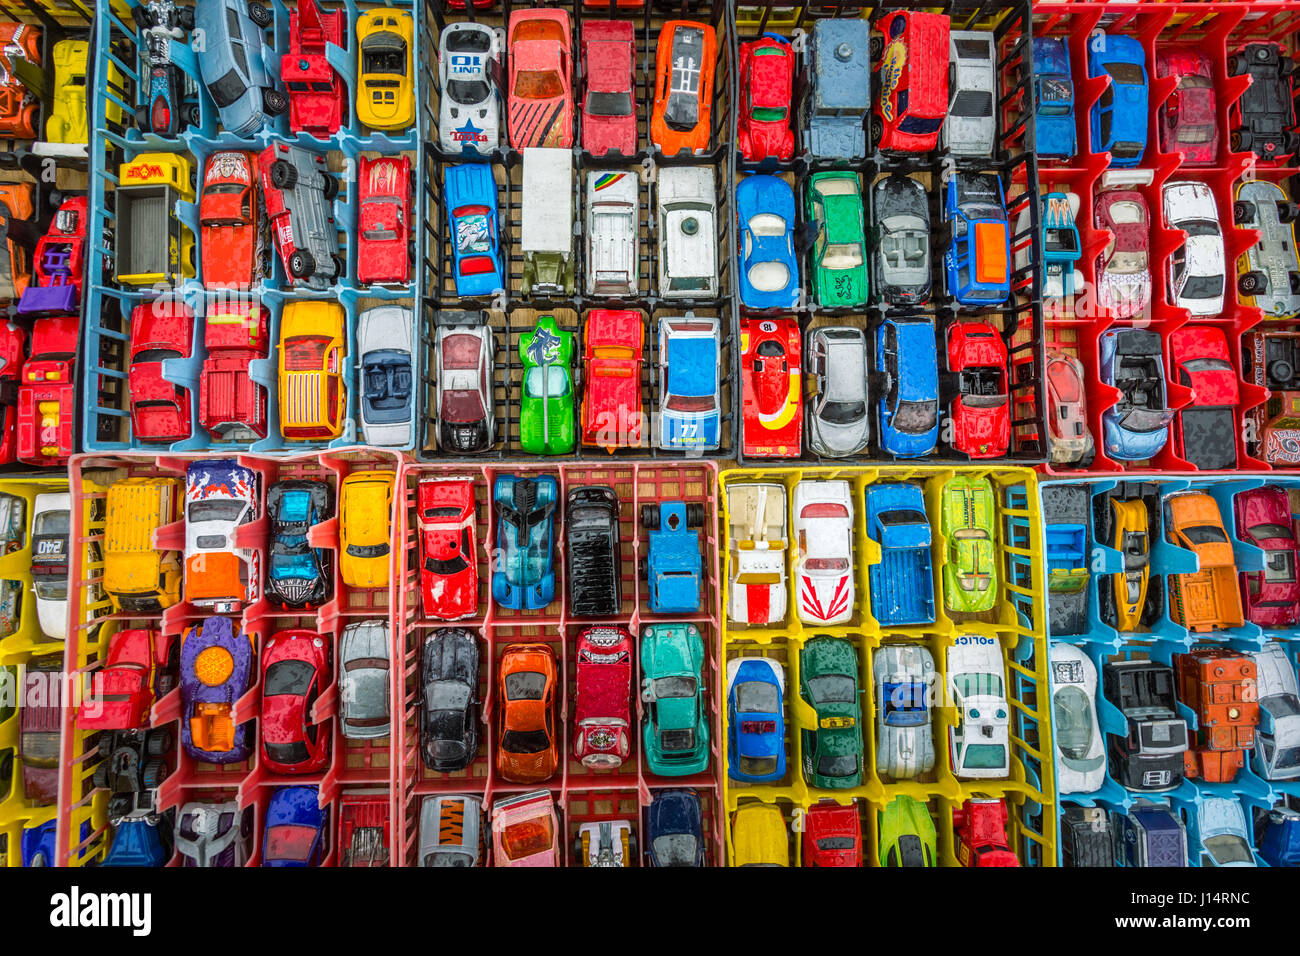 Boxes of toy cars autos on sales in a market Stock Photo